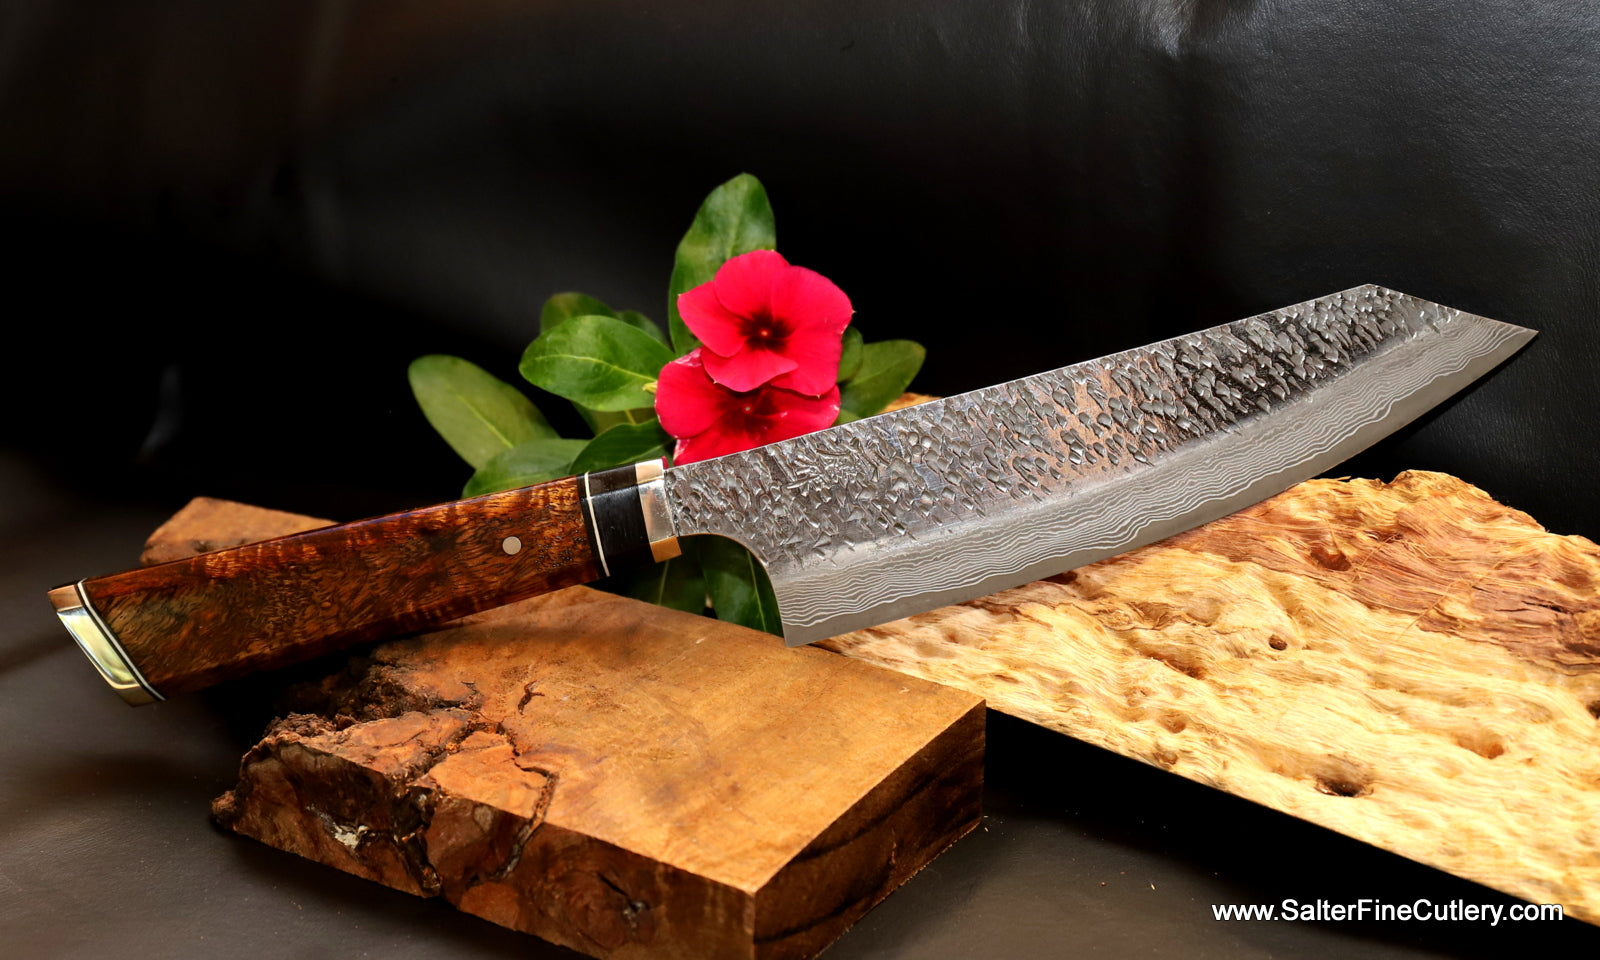 Custom handmade chef and vegetable knife for home or professional chefs from Salter Fine Cutlery